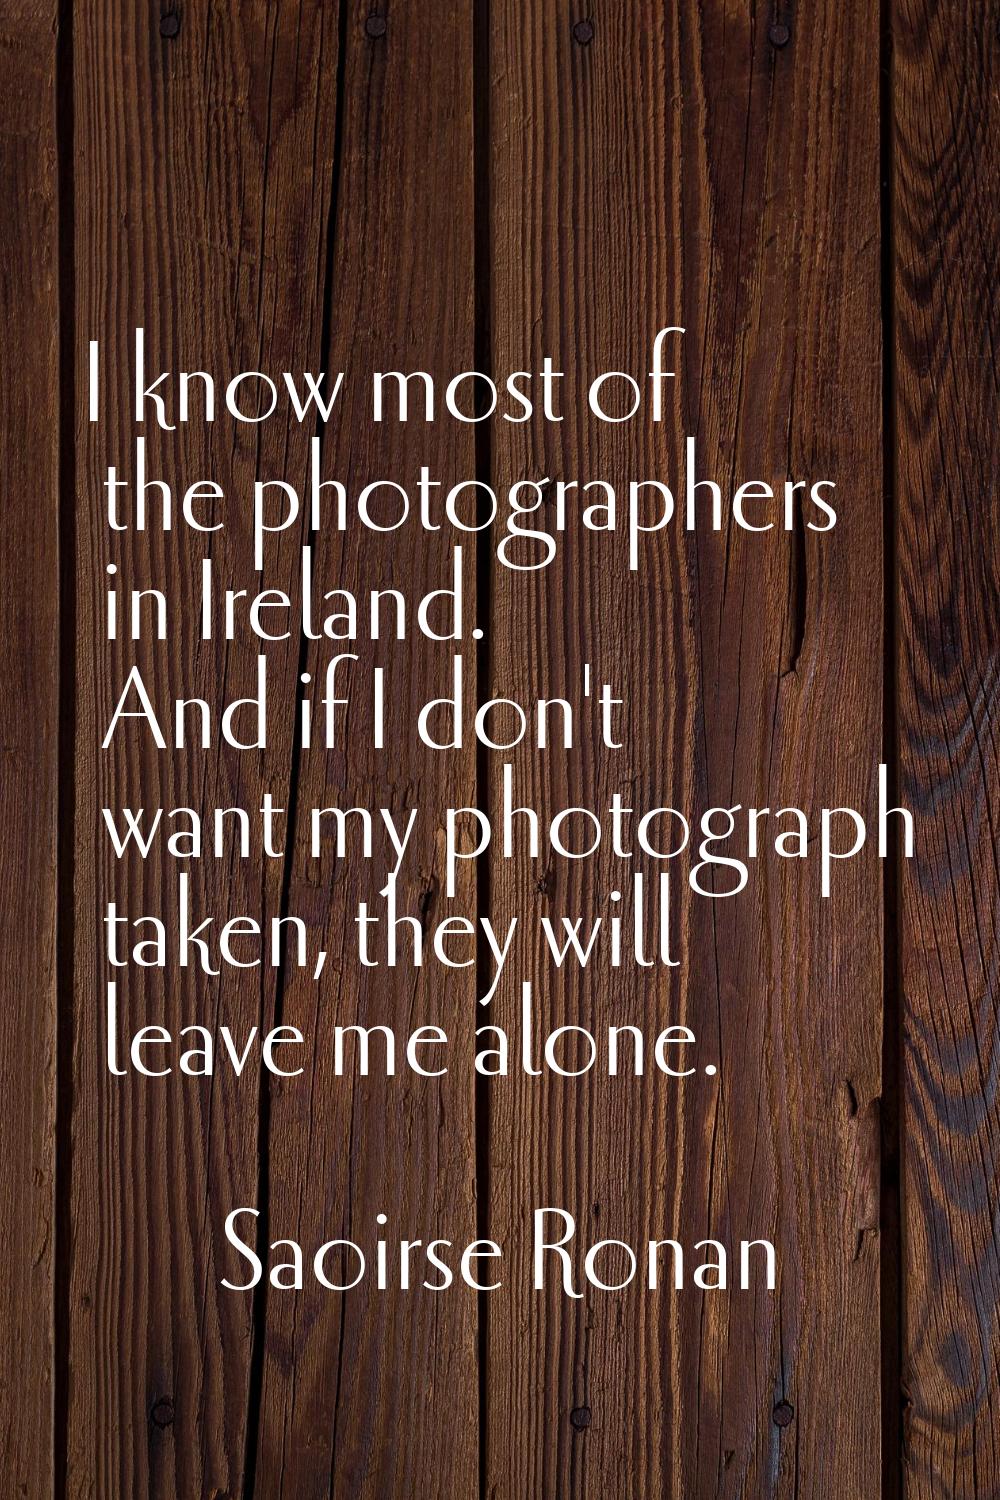 I know most of the photographers in Ireland. And if I don't want my photograph taken, they will lea